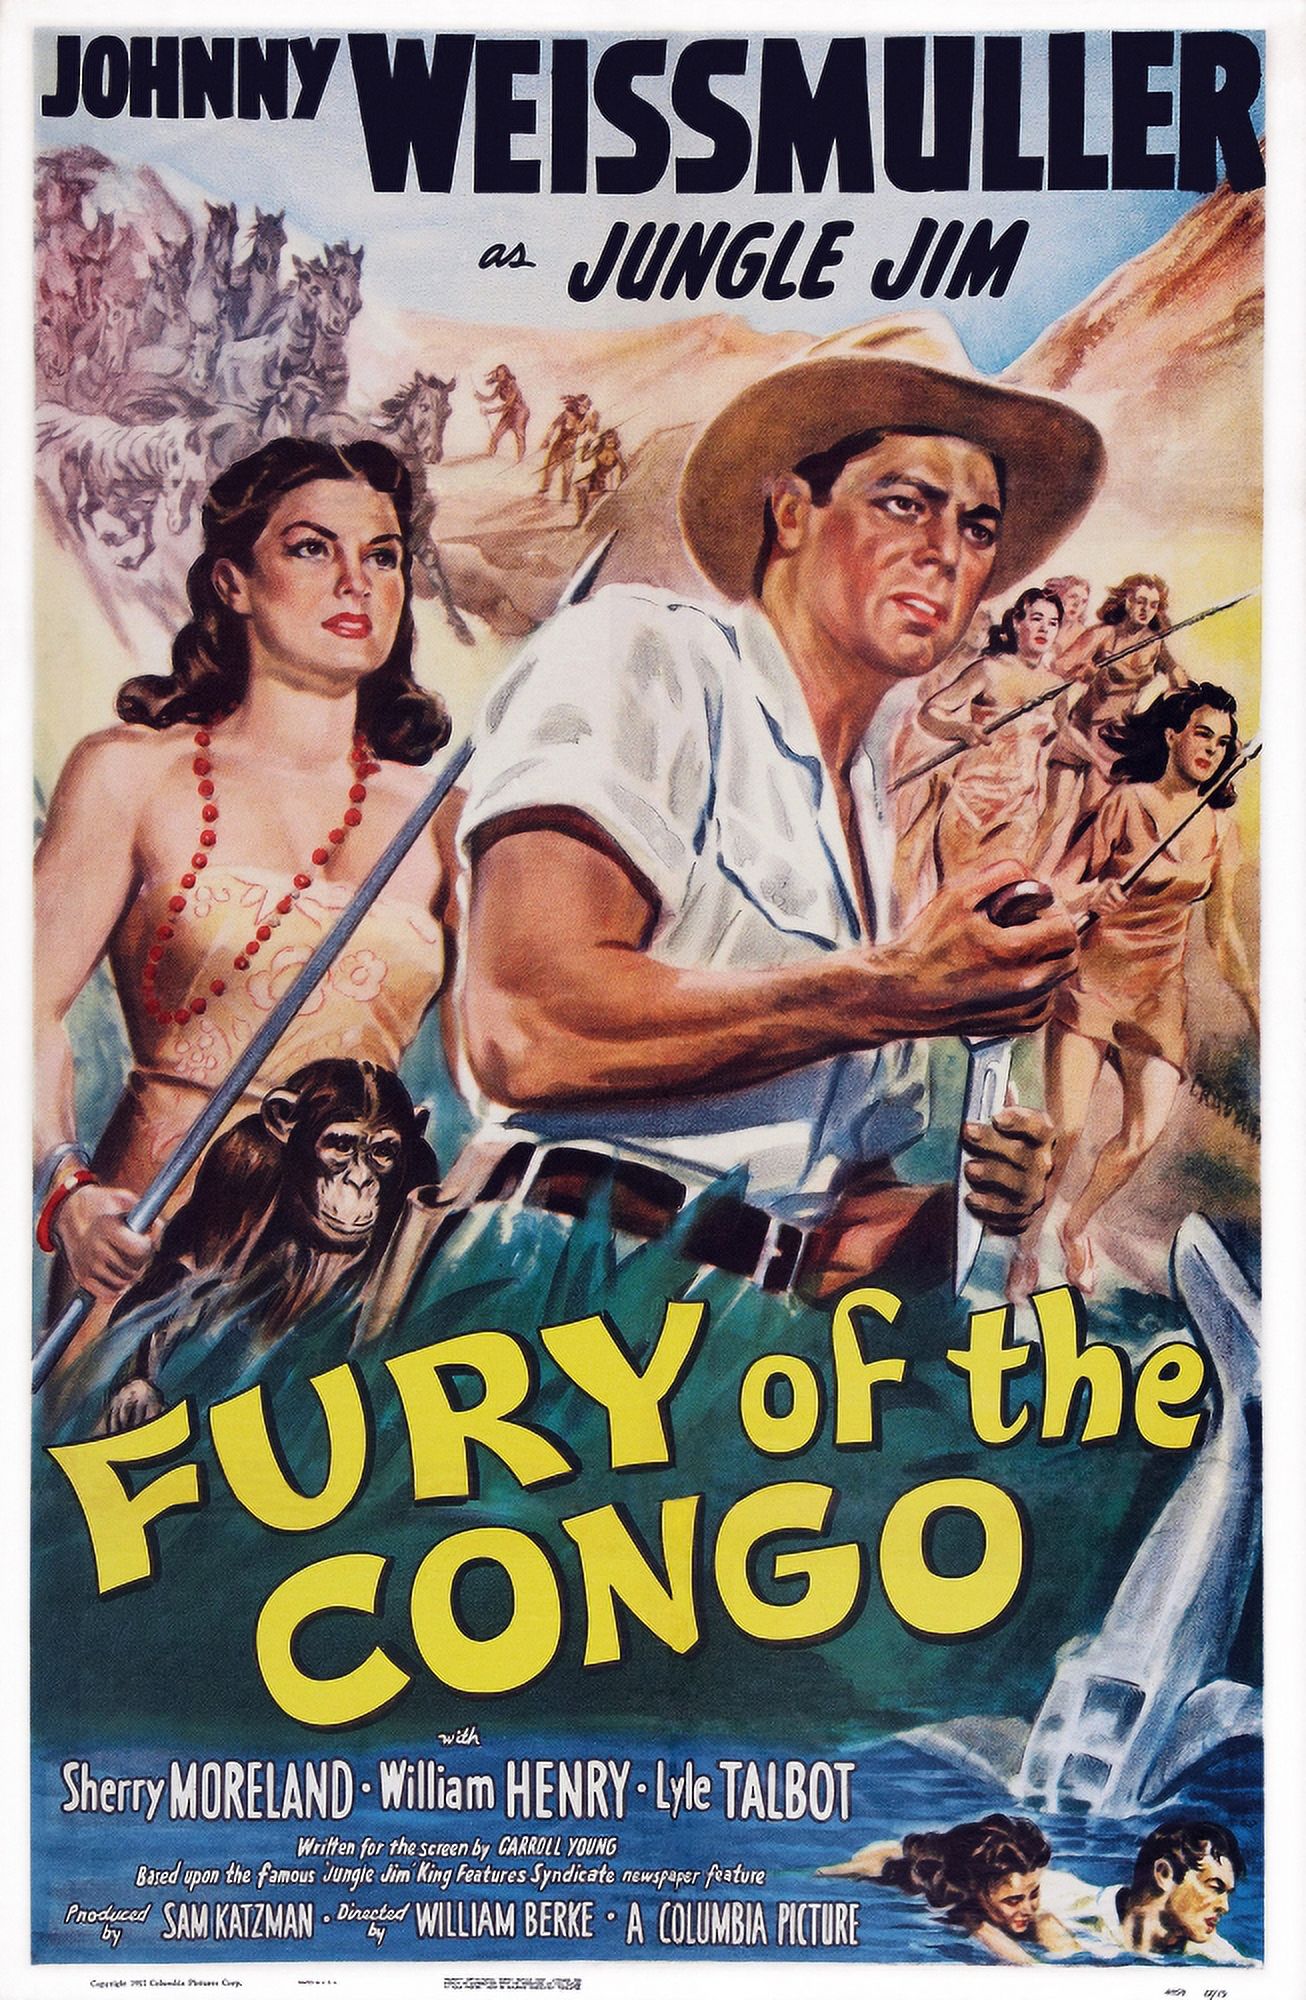 Fury Of The Congo Us Poster Art From Left: Sherry Moreland Johnny Weissmuller 1951 Movie Poster Masterprint (24 x 36) - image 1 of 1